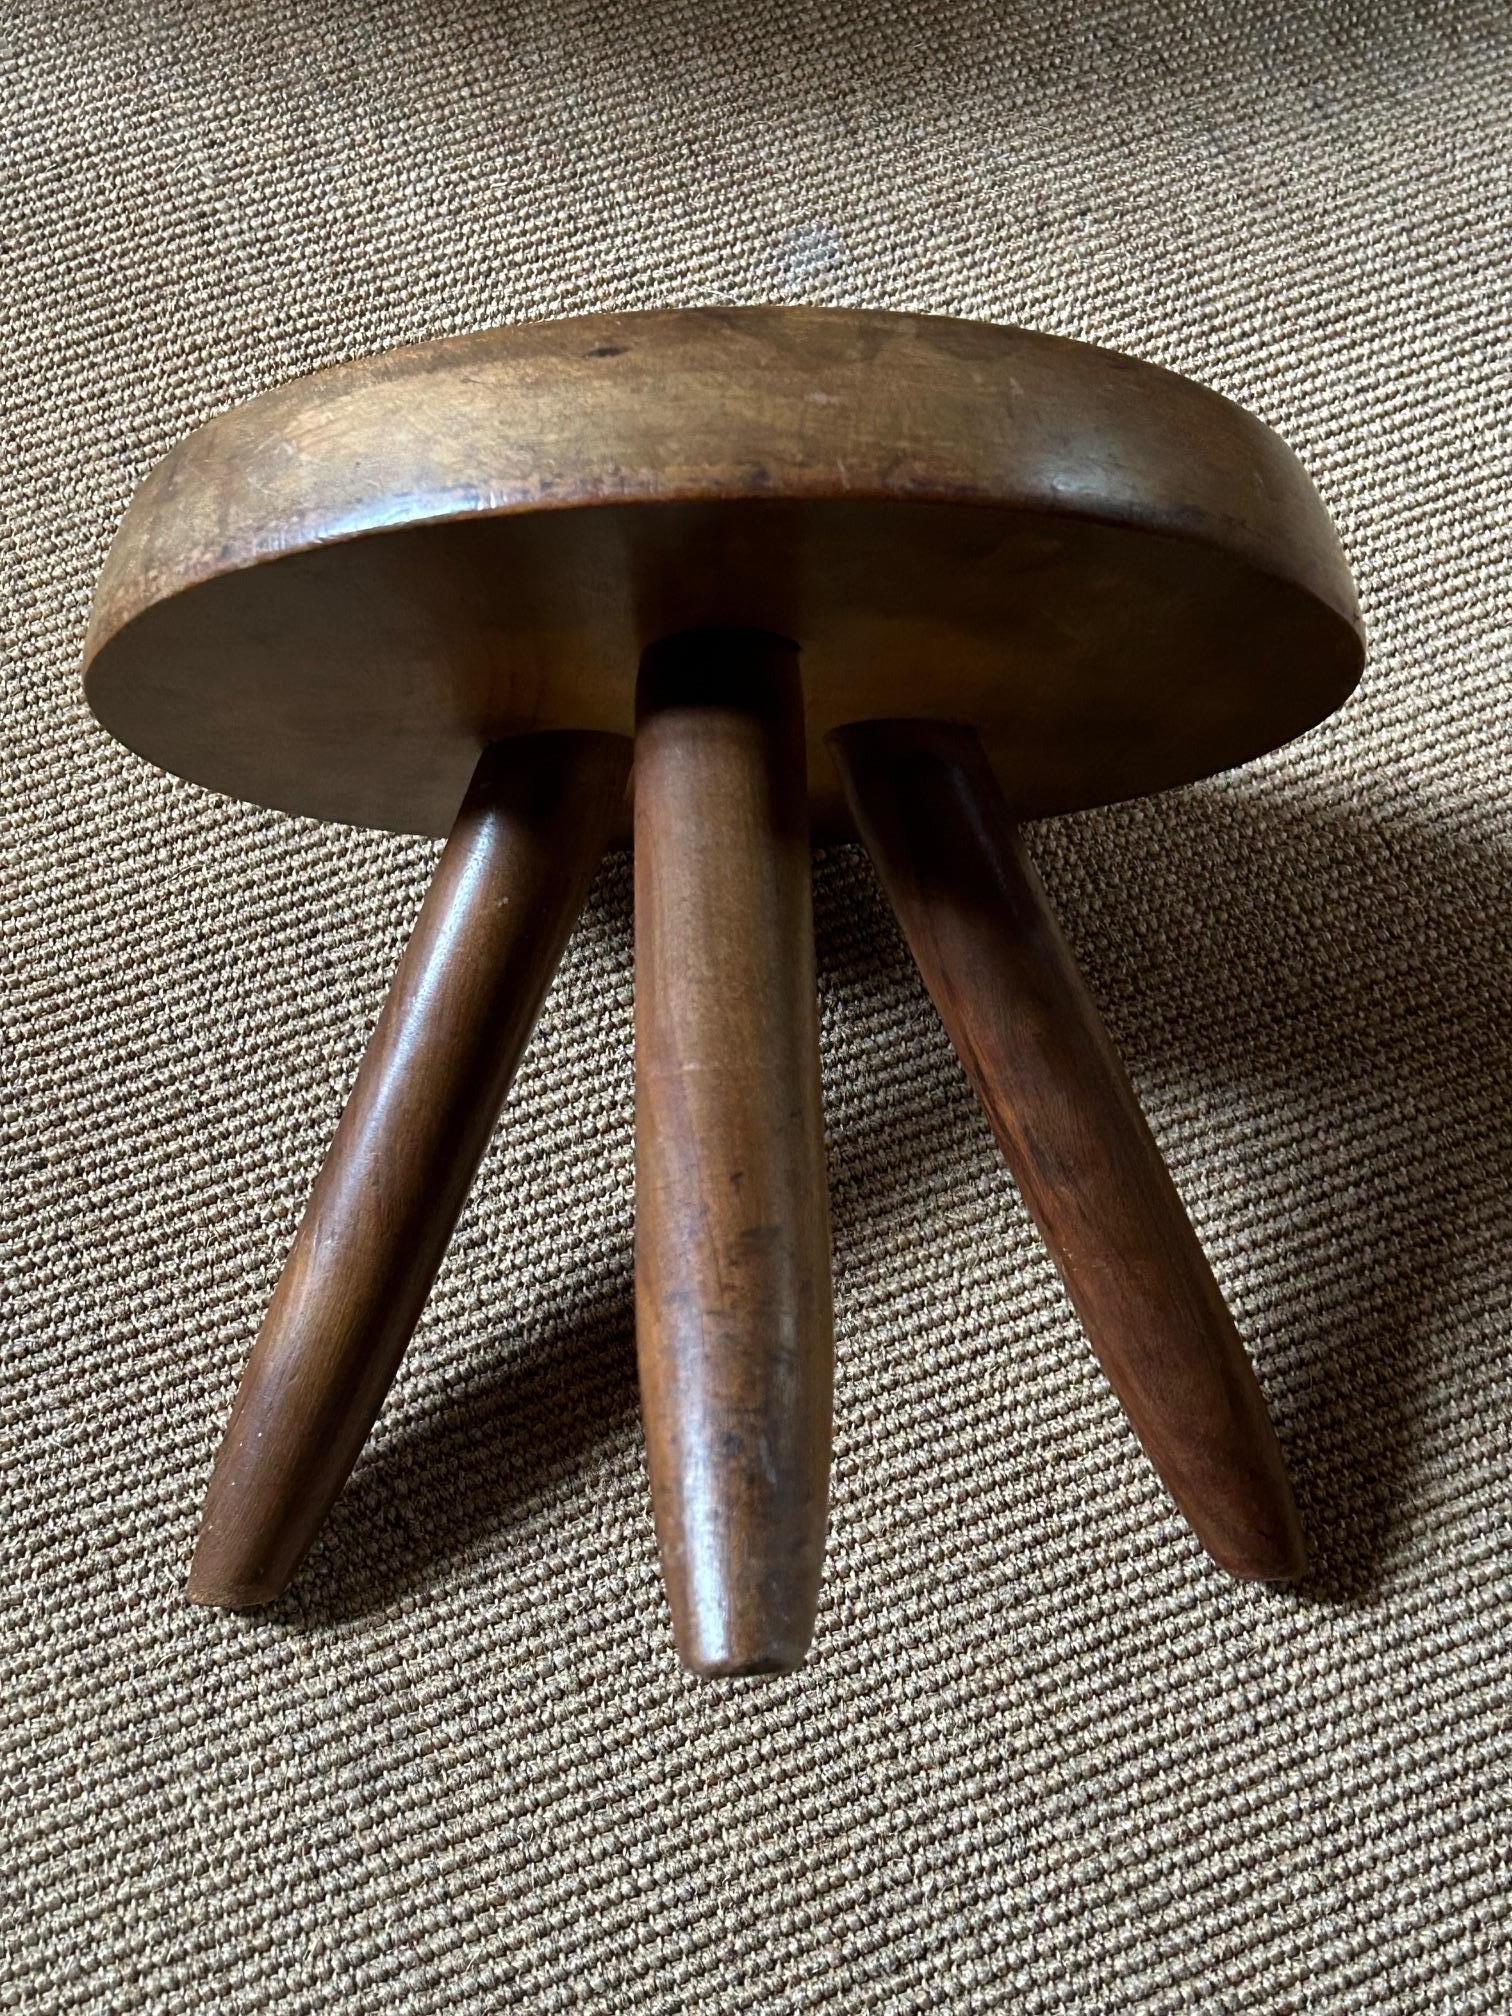 Berger mahogany stool by Charlotte Perriand, produced between 1950 and 1960